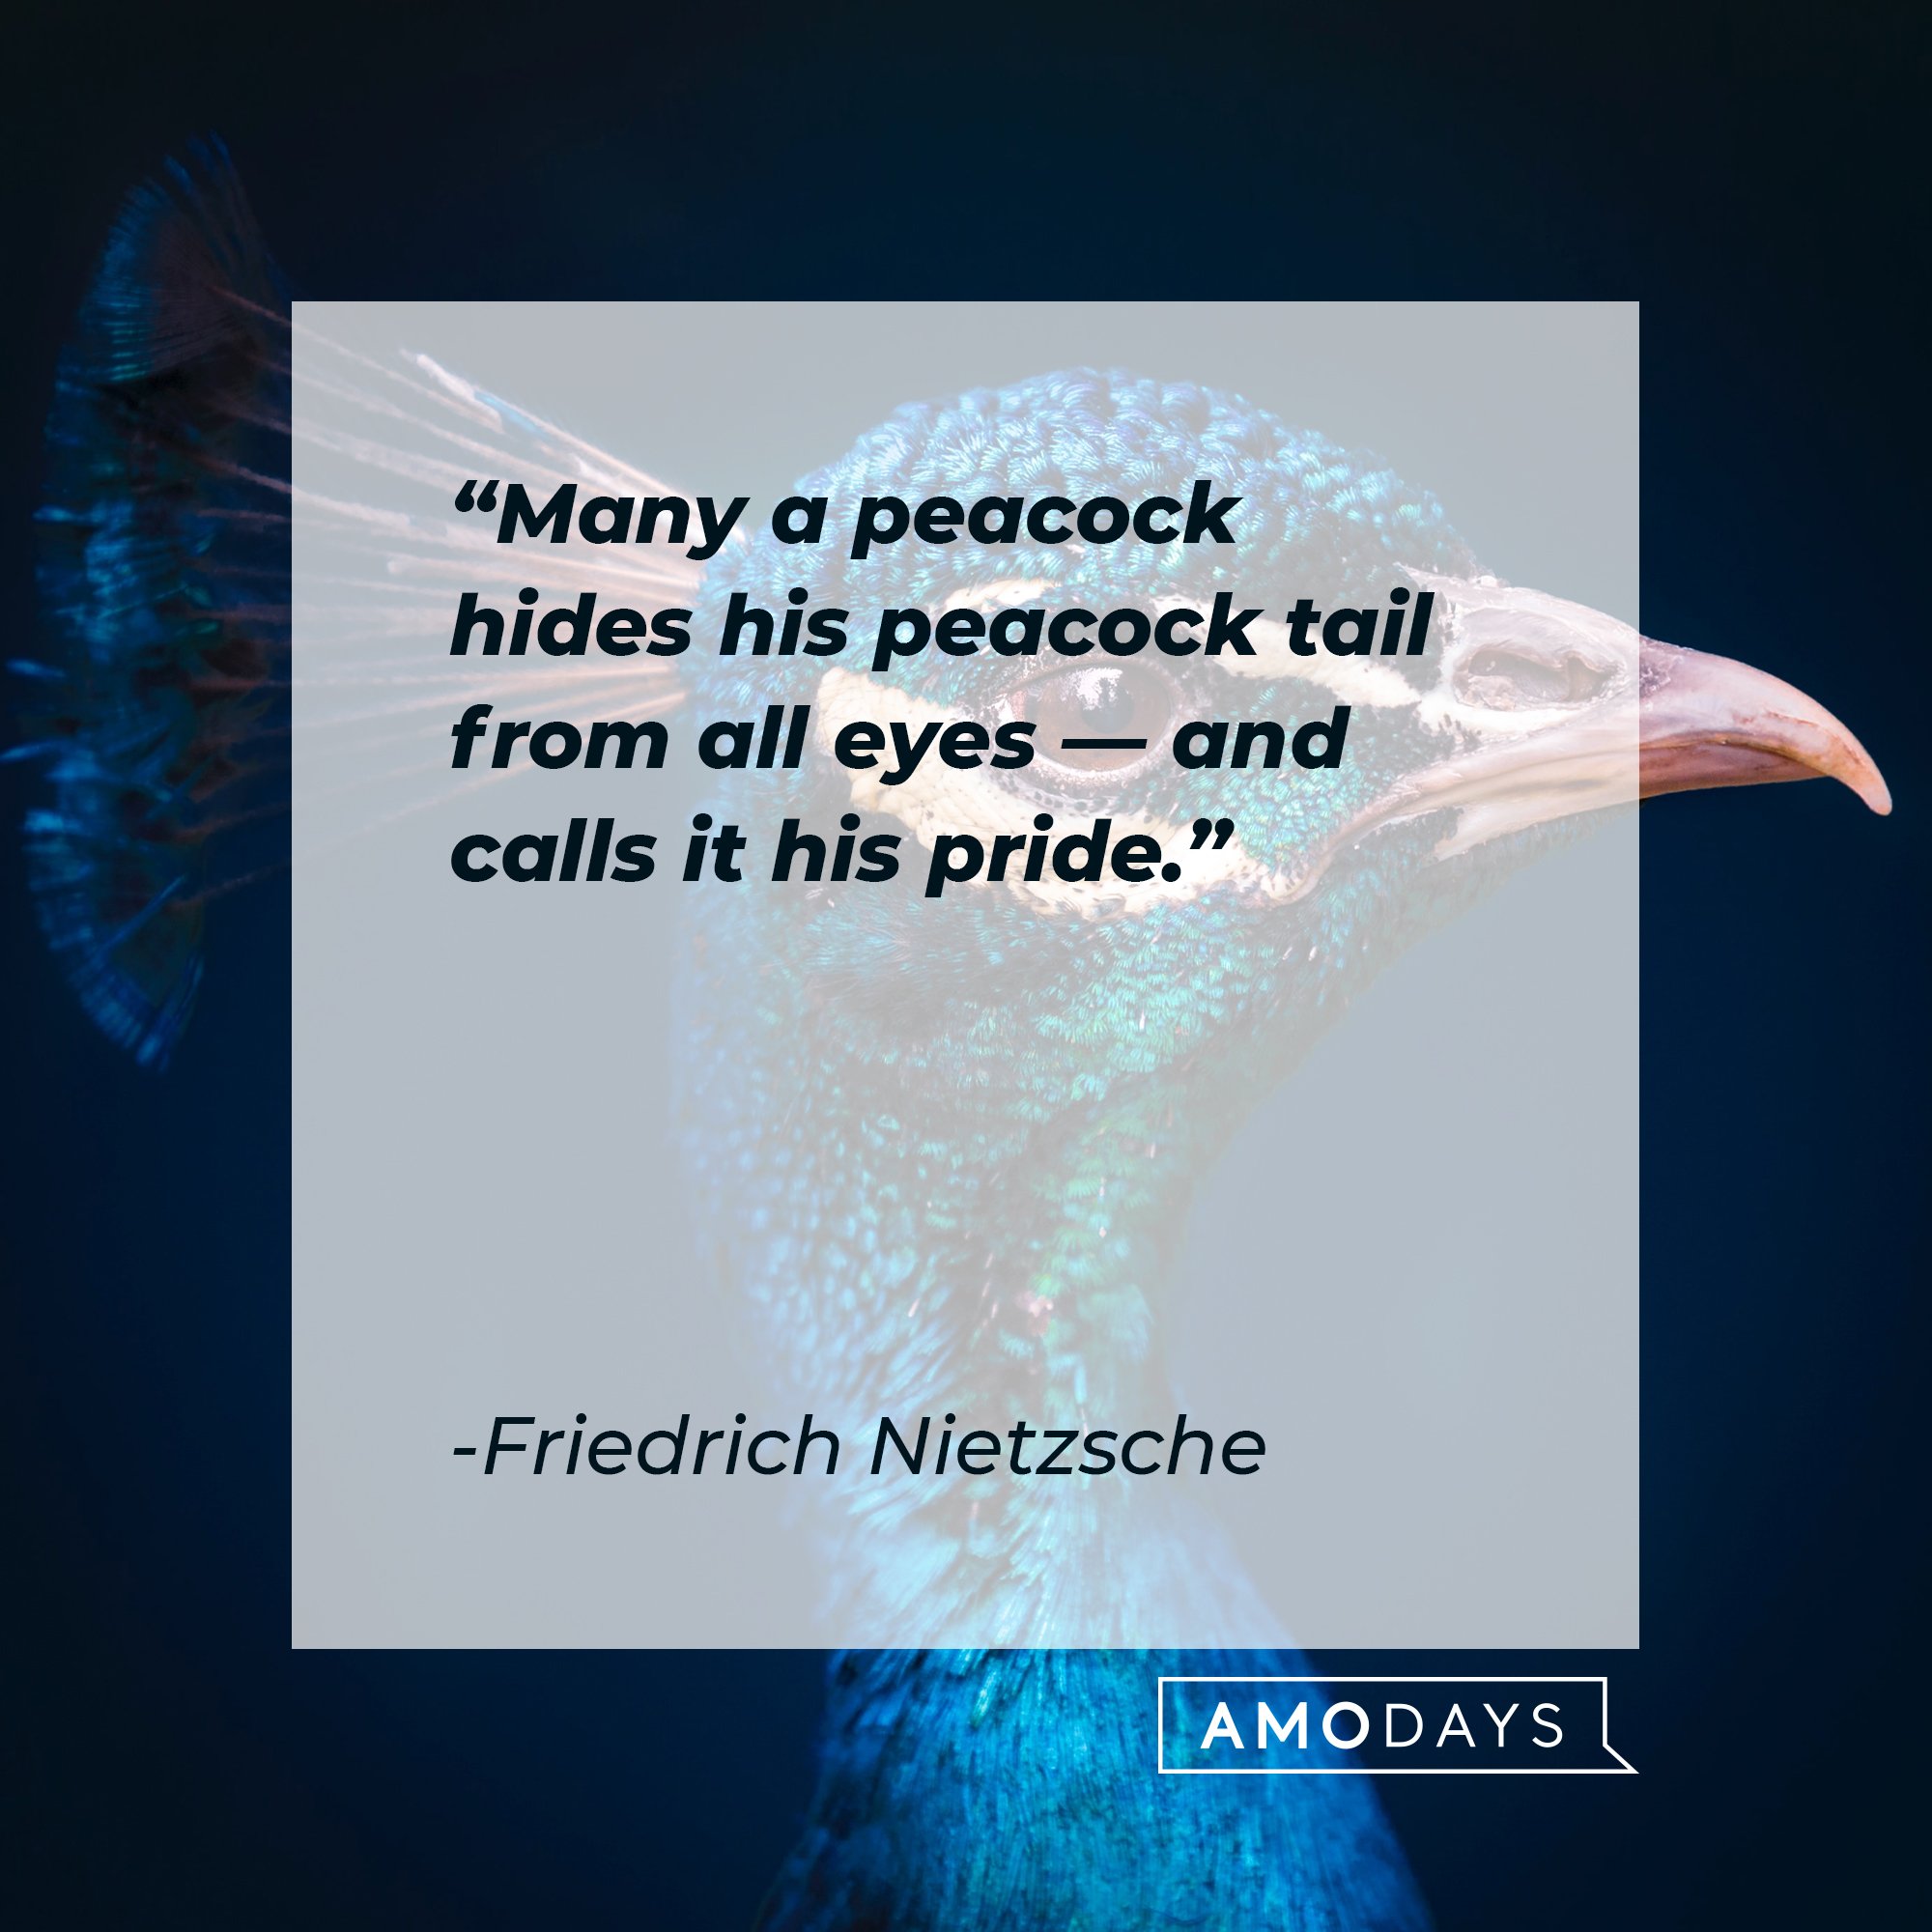  Friedrich Nietzsche: "Many a peacock hides his peacock tail from all eyes — and calls it his pride." | Image: AmoDays